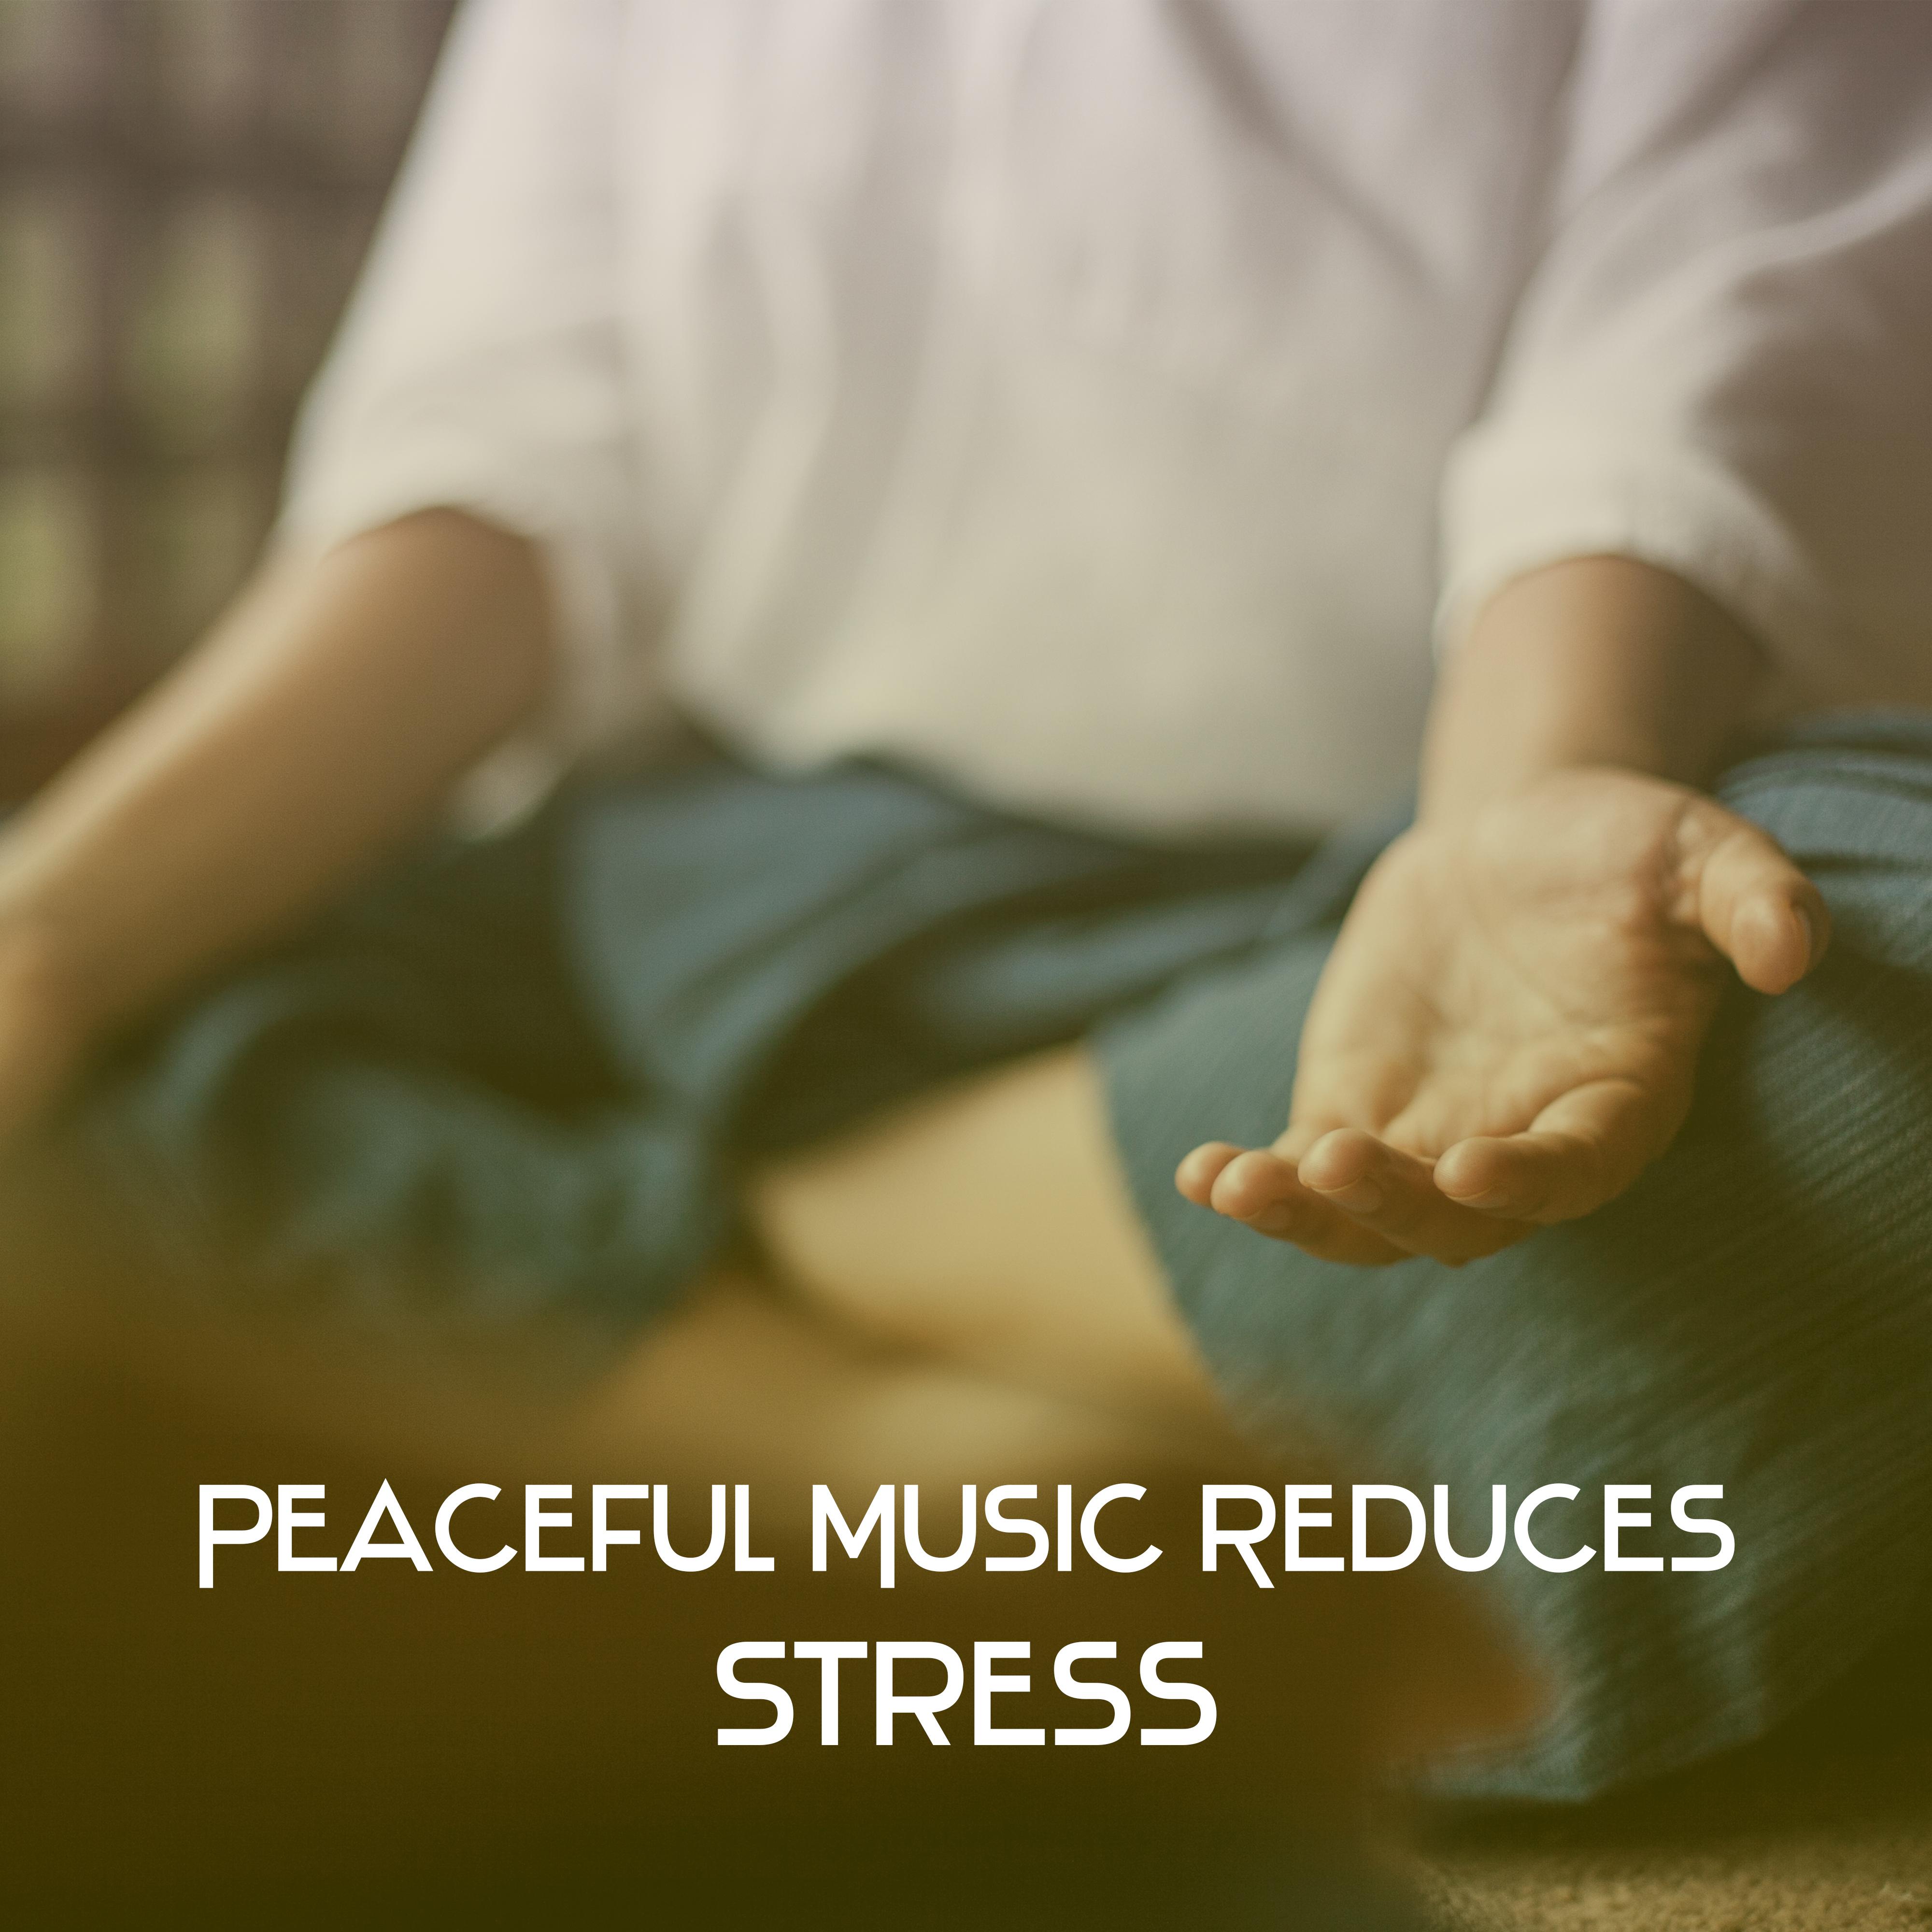 Peaceful Music Reduces Stress – Healing Meditation, Stress Relief, Reiki Music, Nature Sounds for Yoga, Silence & Focus